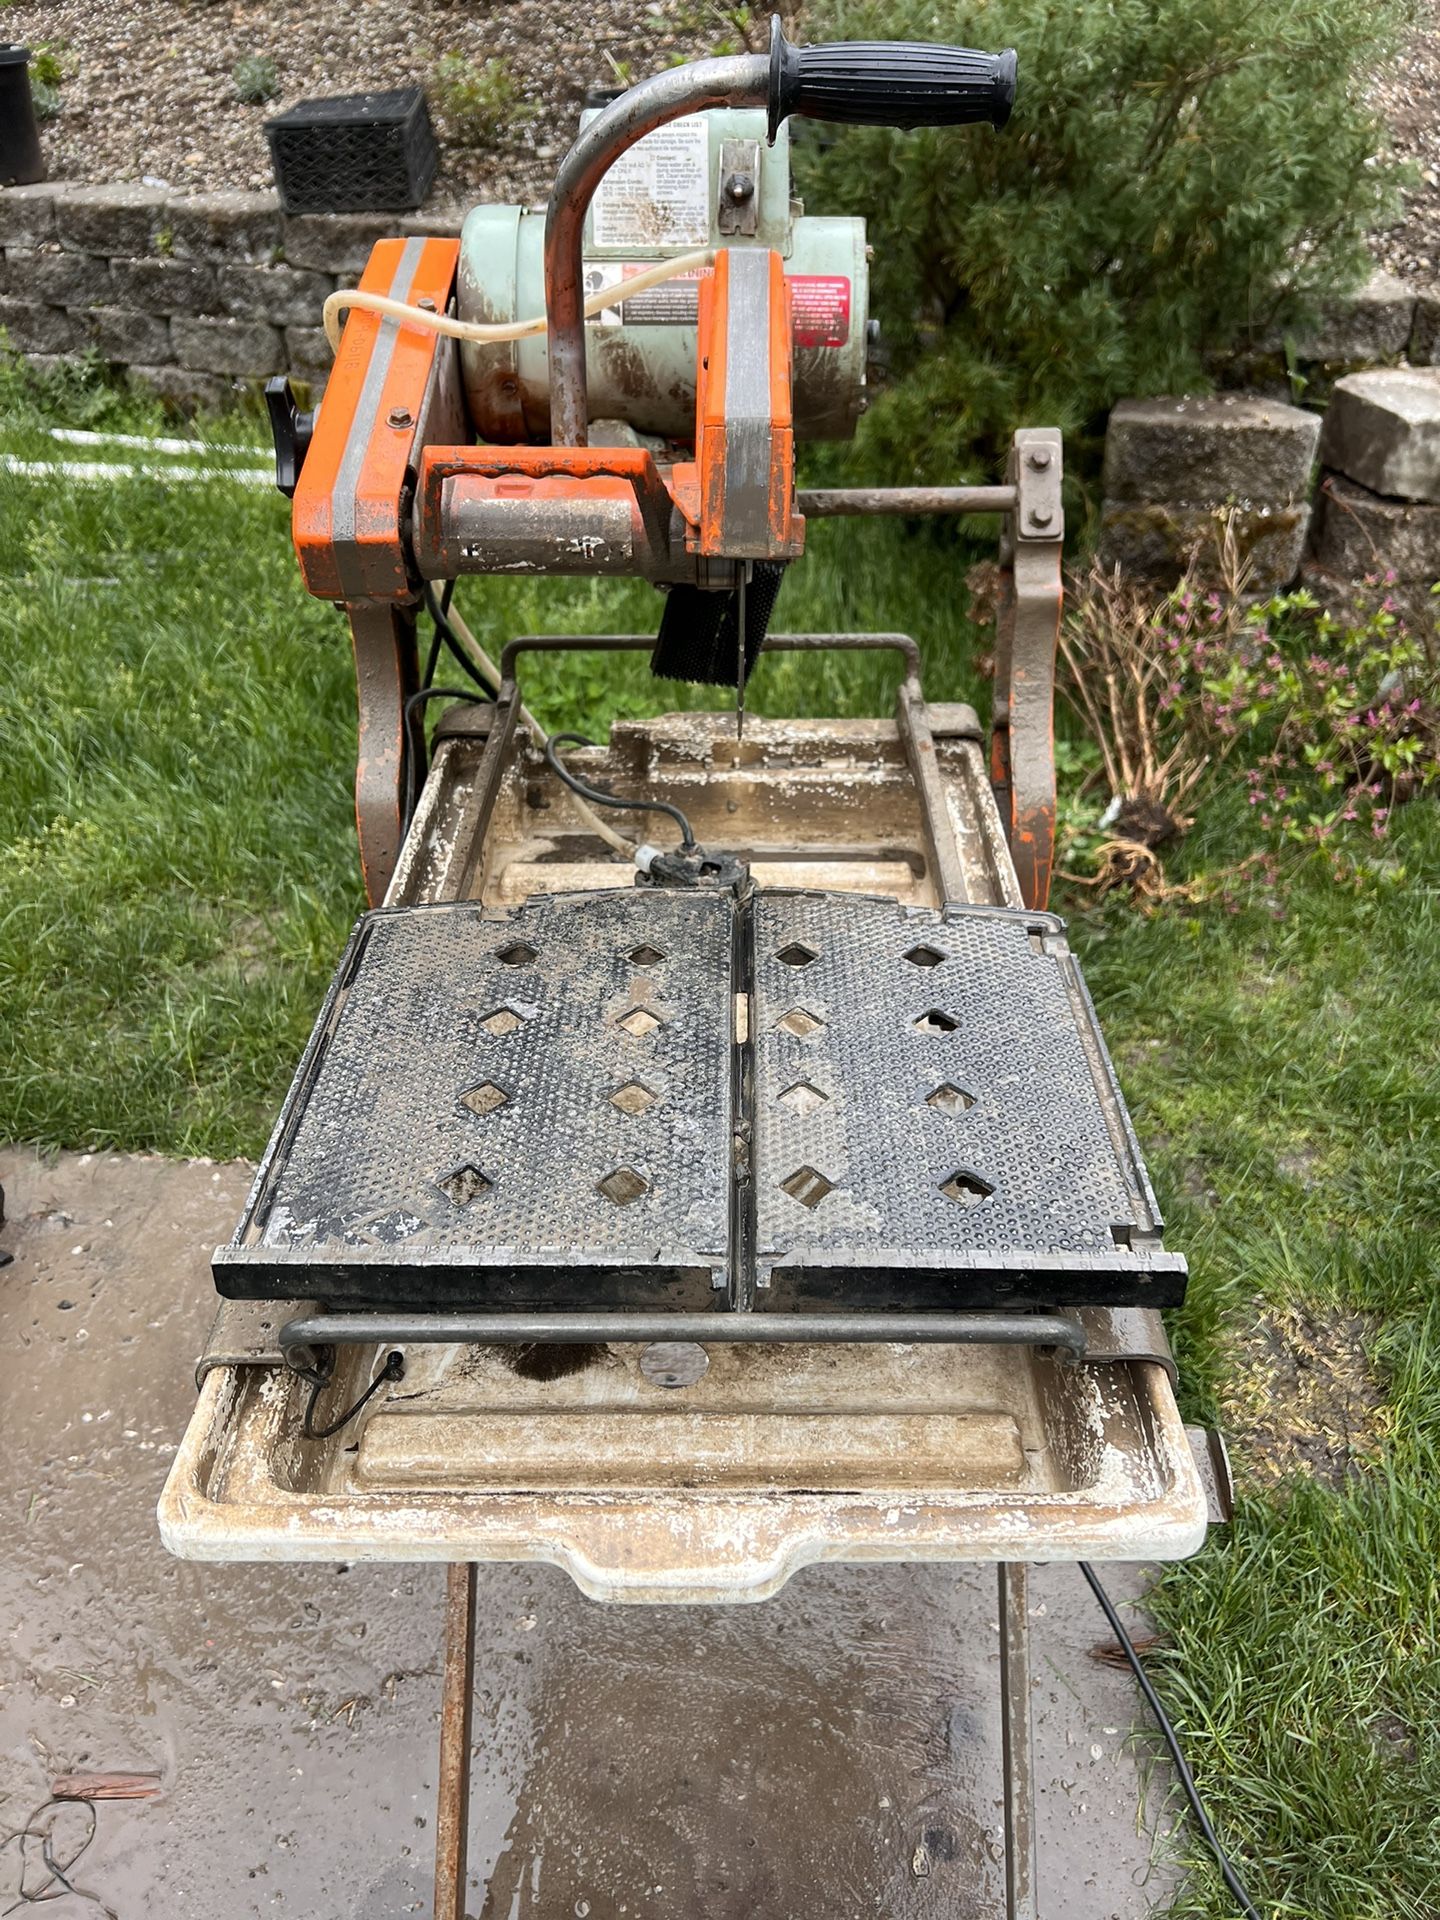 Tile/paver Table Saw With Stand 10”